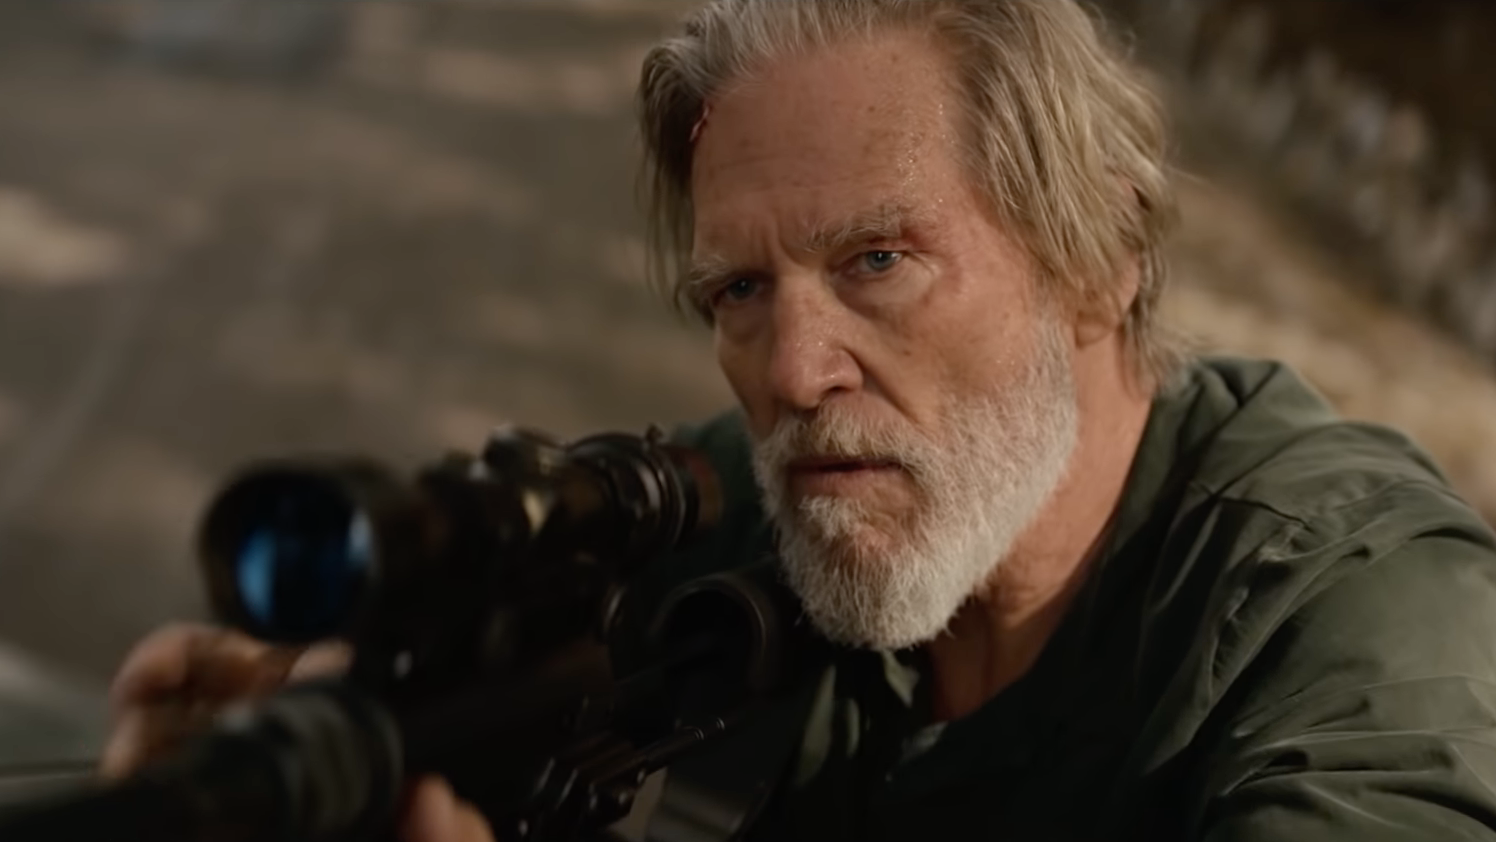 Jeff Bridges has a particular set of skills in FX’s The Old Man trailer